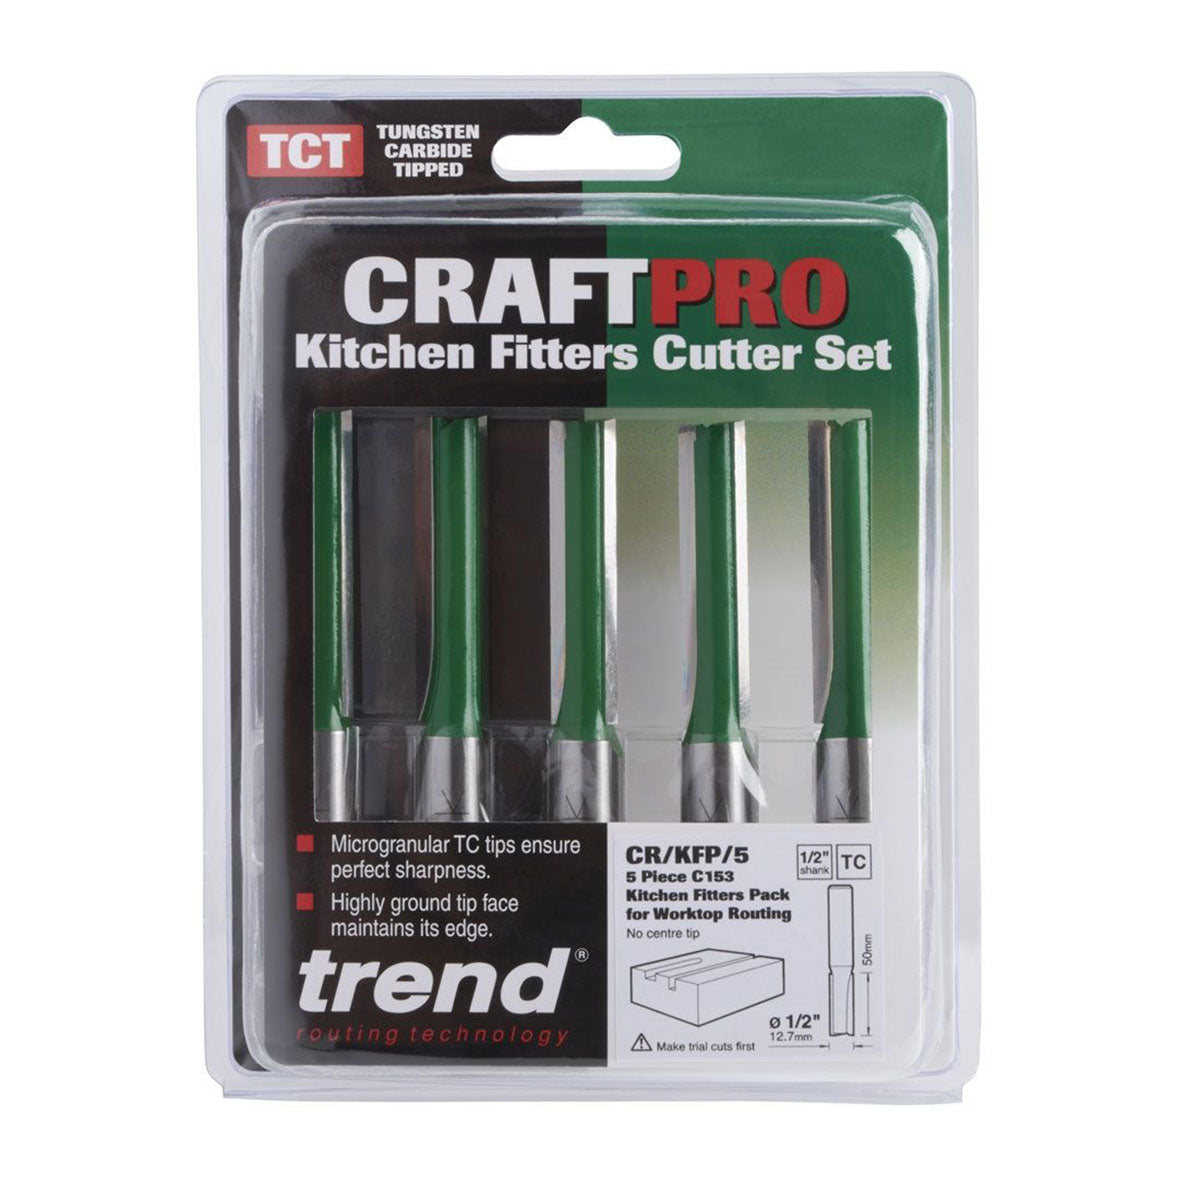 Trend CR/KFP/5 Router Cutter Kitchen Fitters Pack of 5